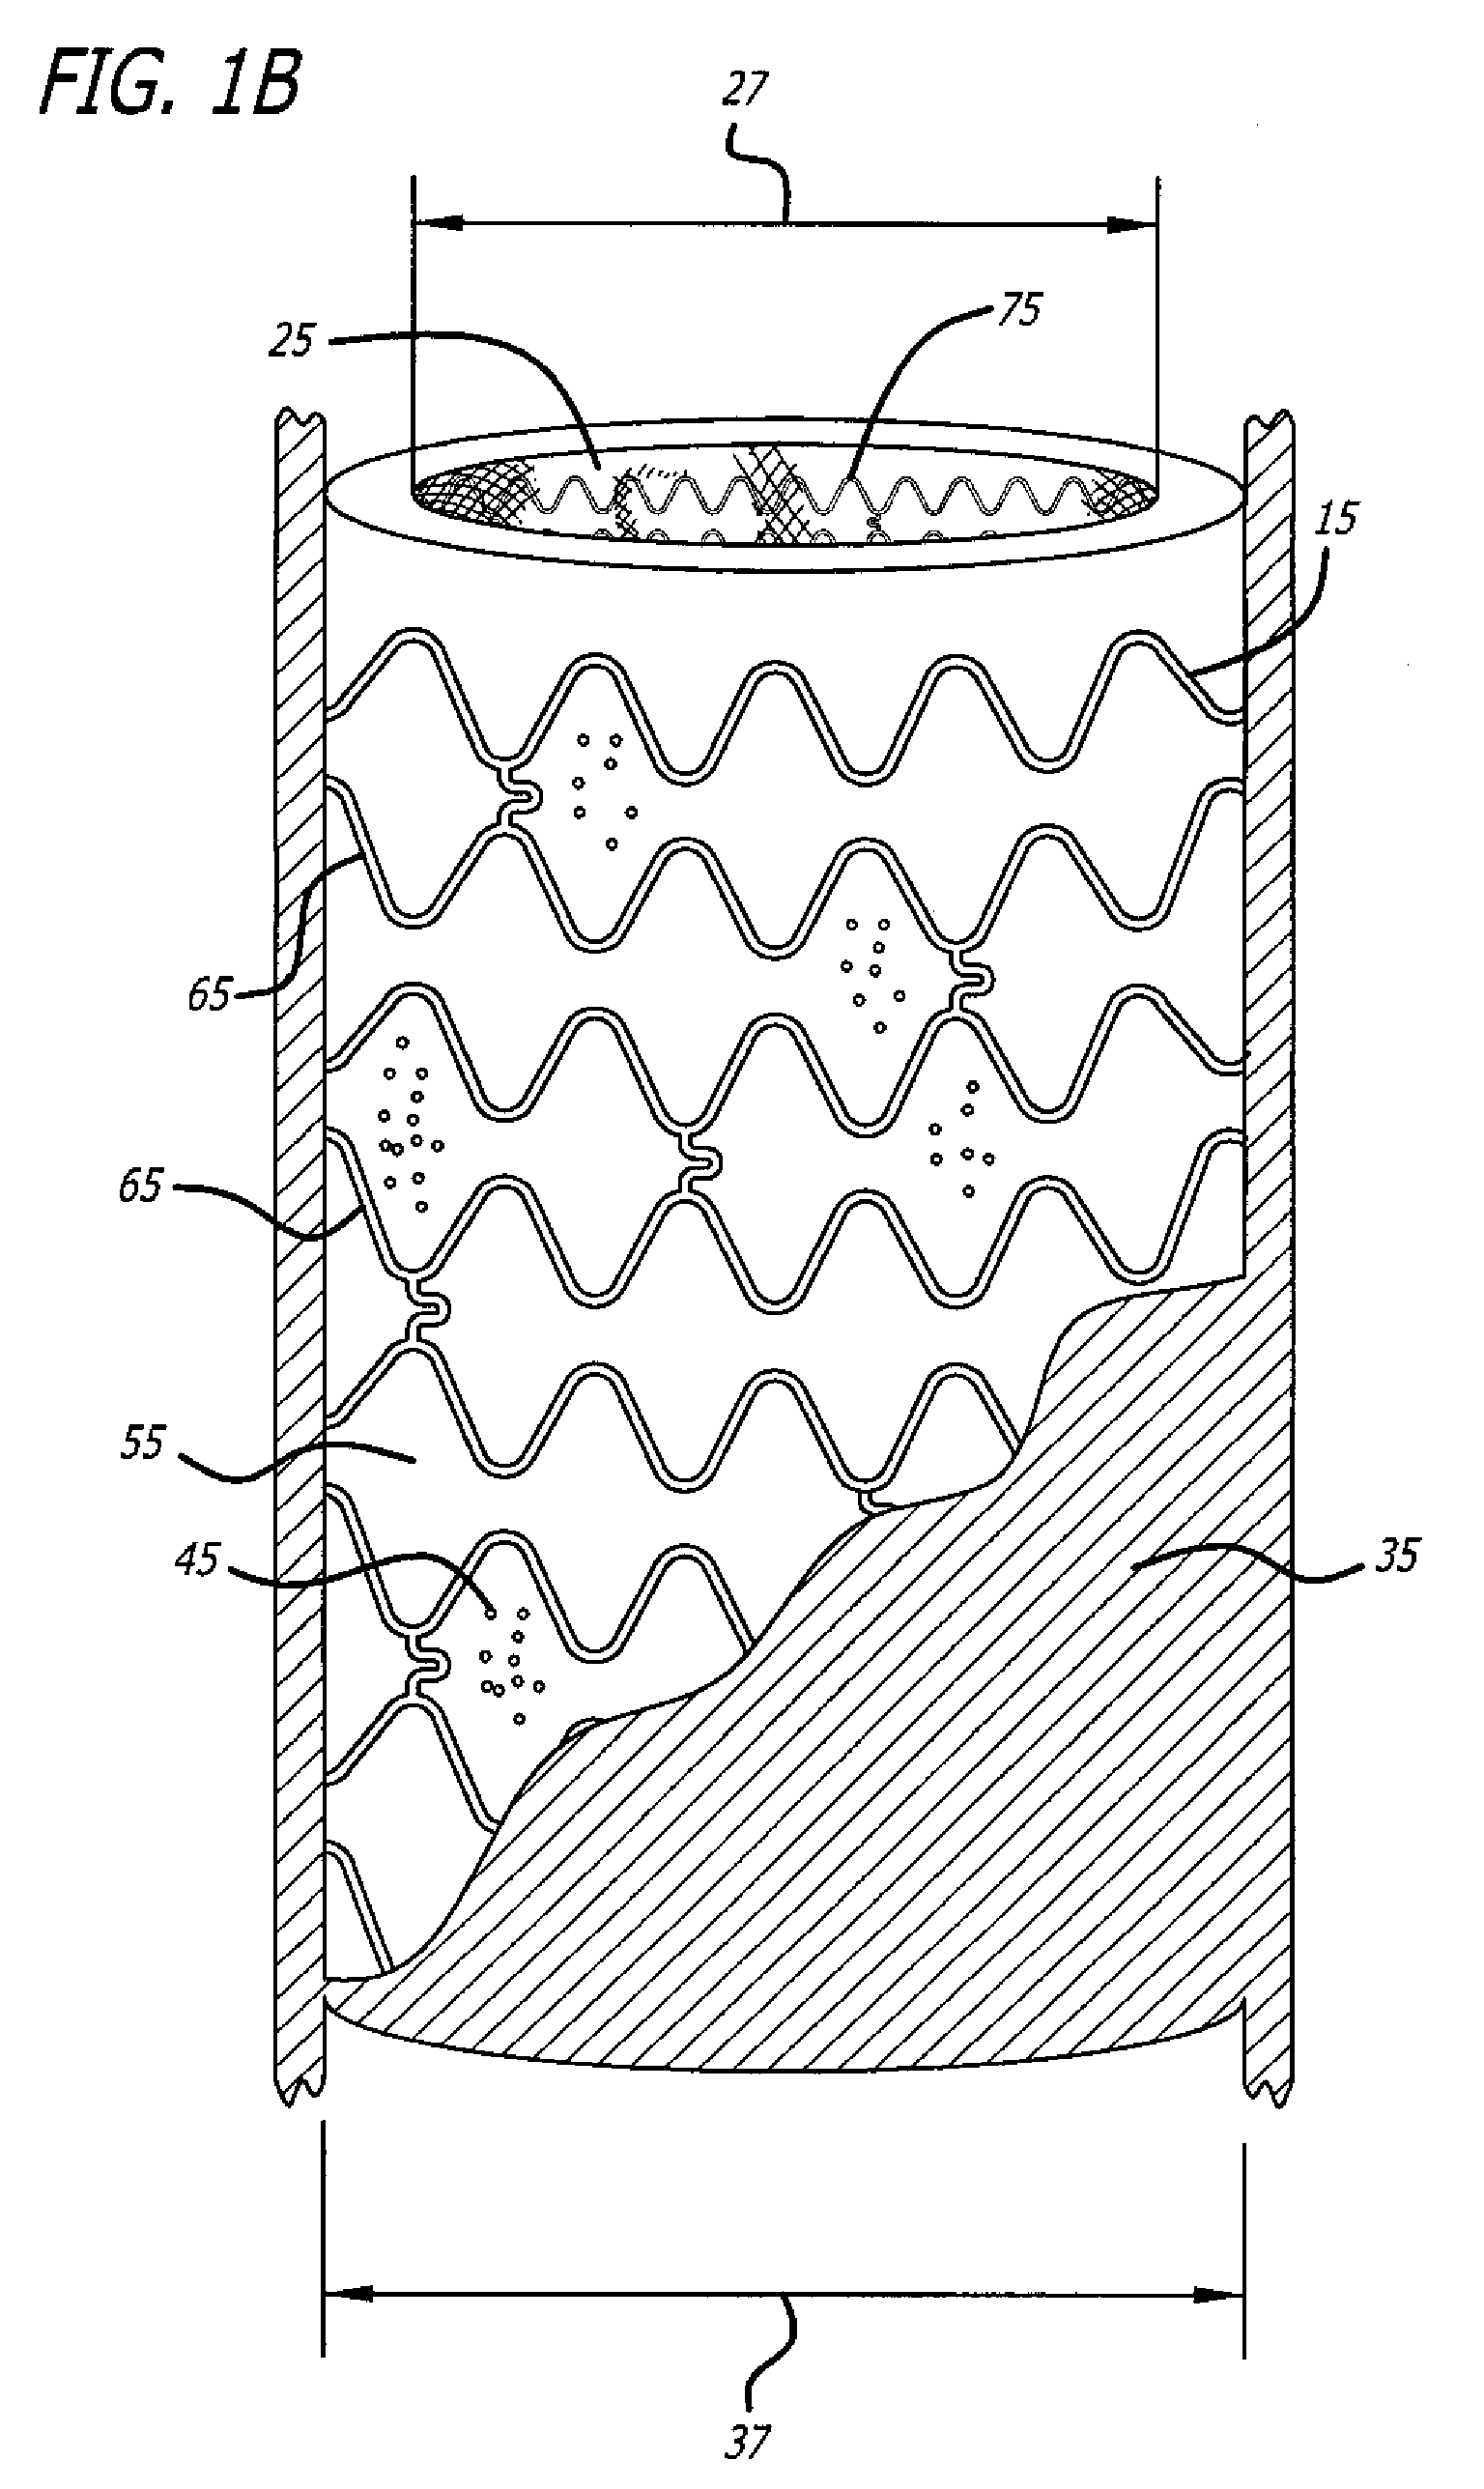 Intravascular Devices for Cell-Based Therapies